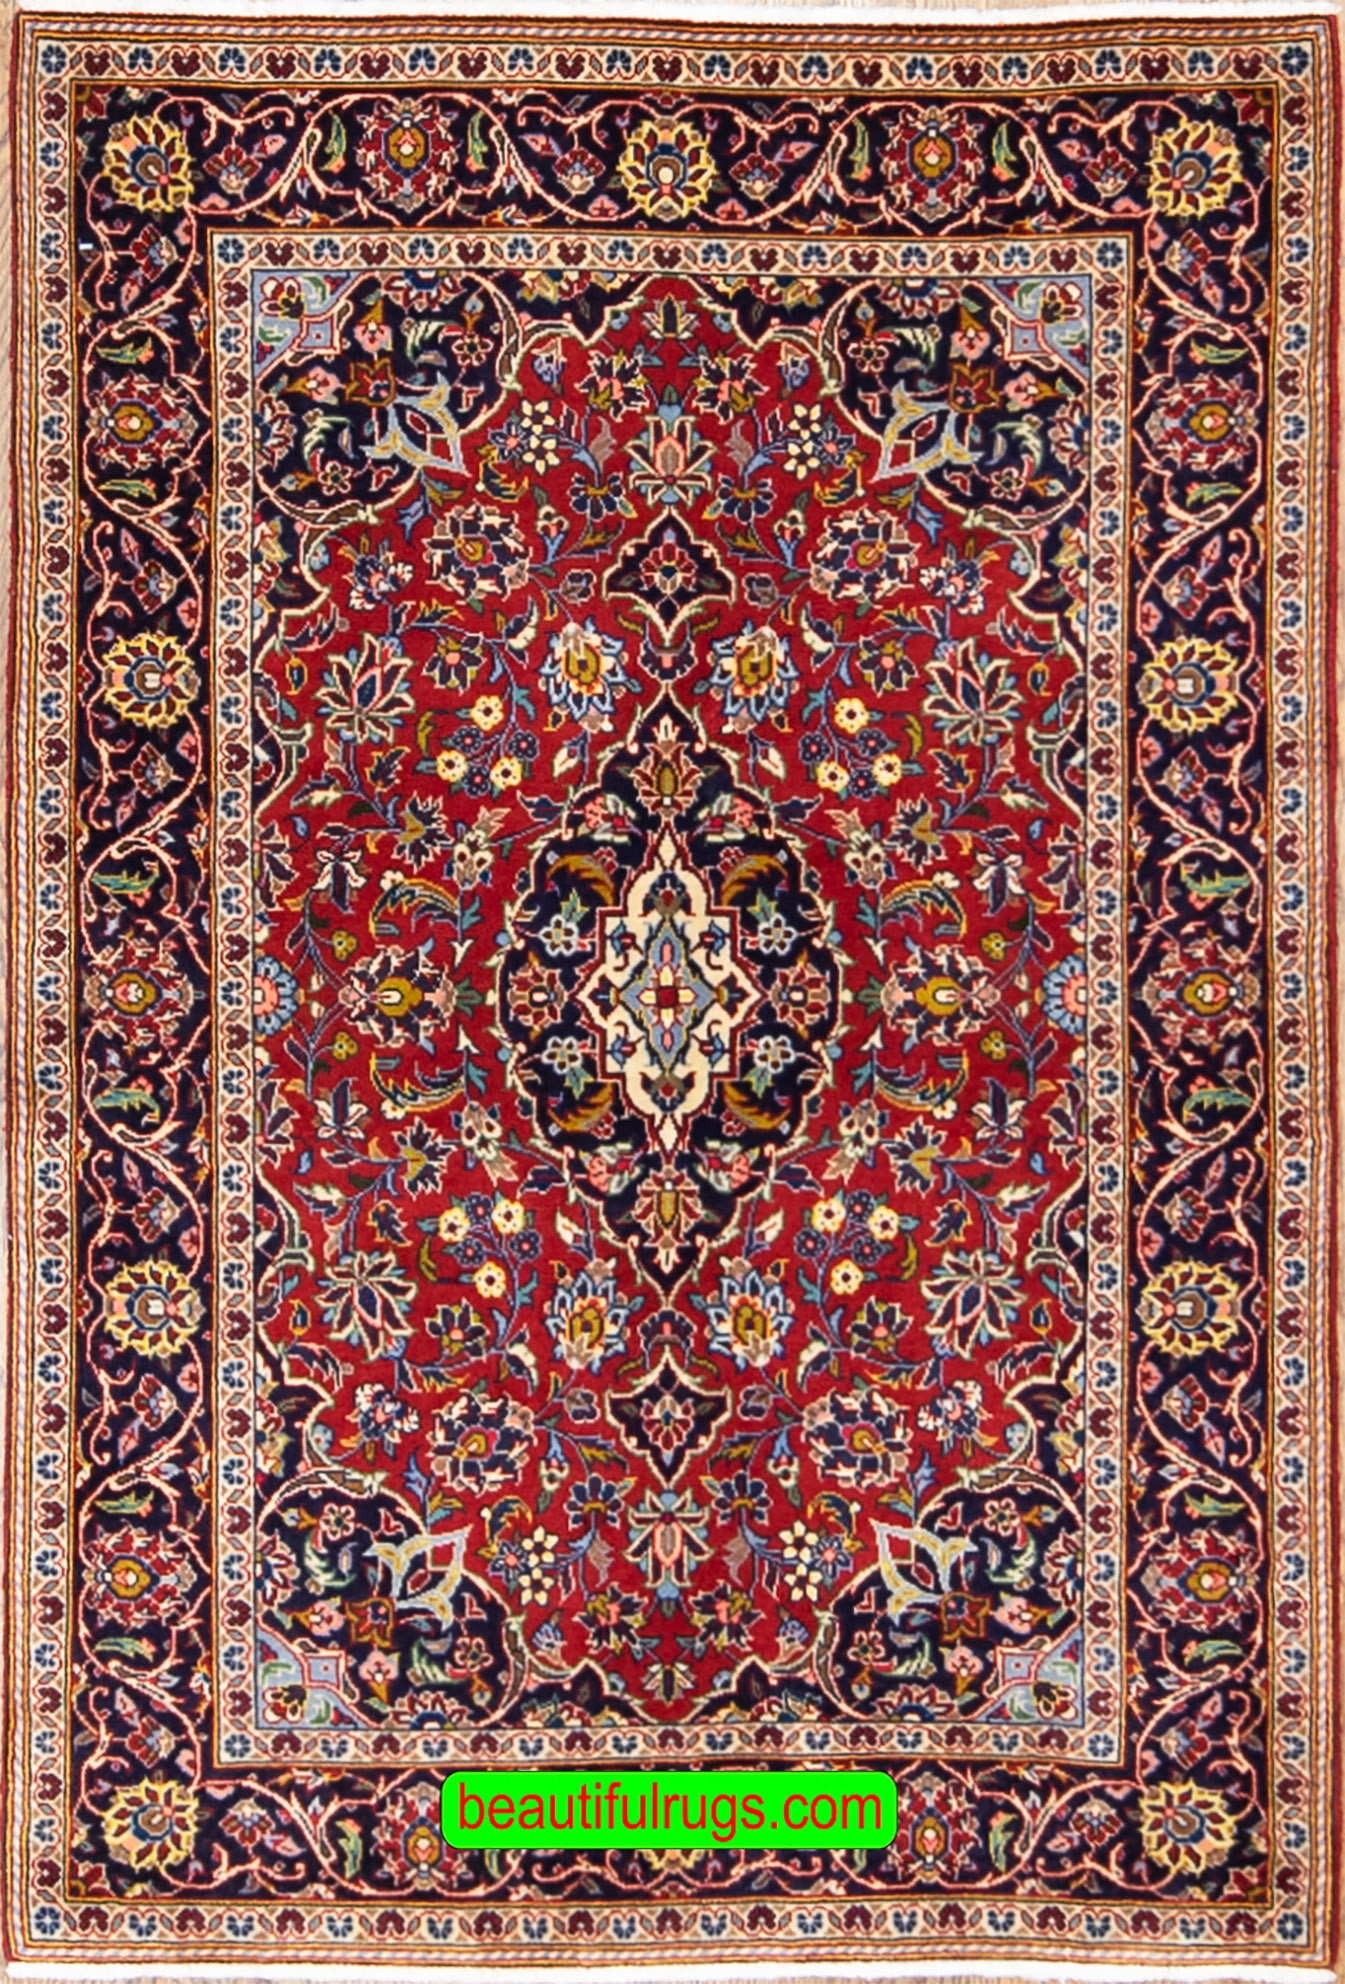 Handmade Persian Kashan carpet in red color. Size 3.6x5.2.